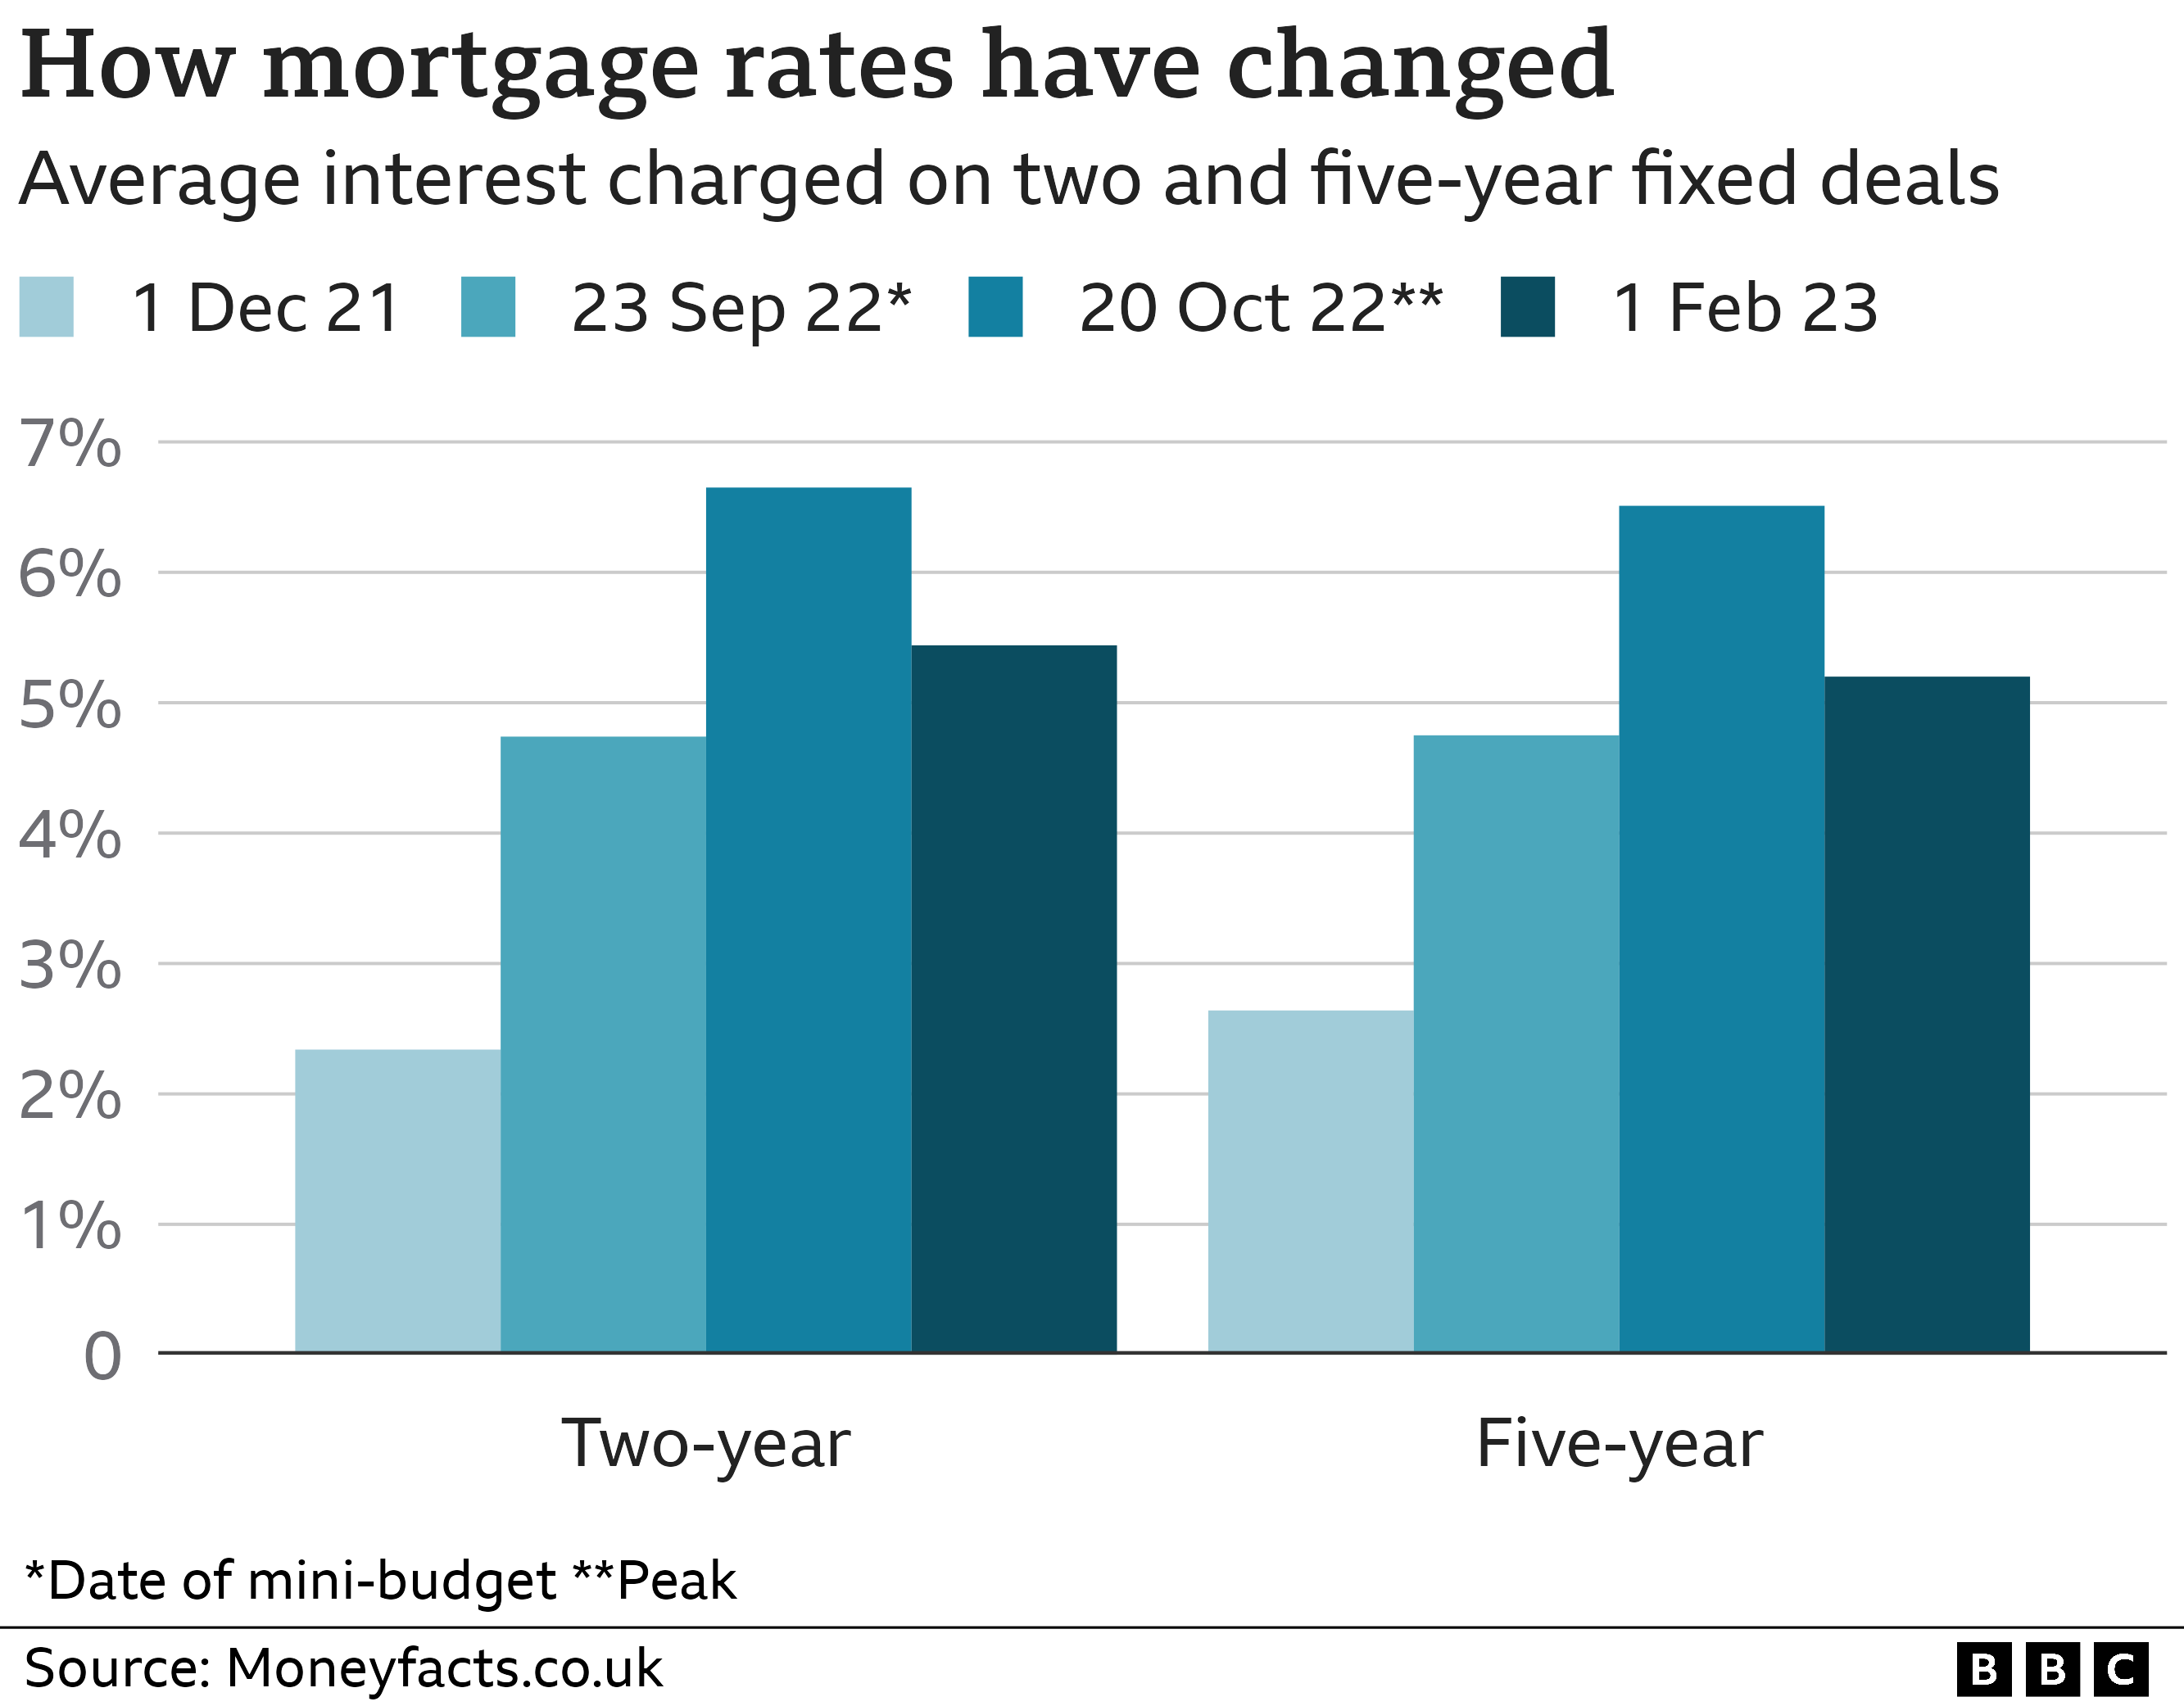 Chart showing how the average interest charged on fixed-rate mortgage deals has changed from 2.34% for a two-year deal in December 2021, to 4.74% on 23 September 2022 (the mini-budget), to a peak of 6.65% on 20 October 2022 and falling to 5.44% on 1 February 2023 - the figures for five-year deals were 2.64%, 4.75%, 6.51% and 5.2%